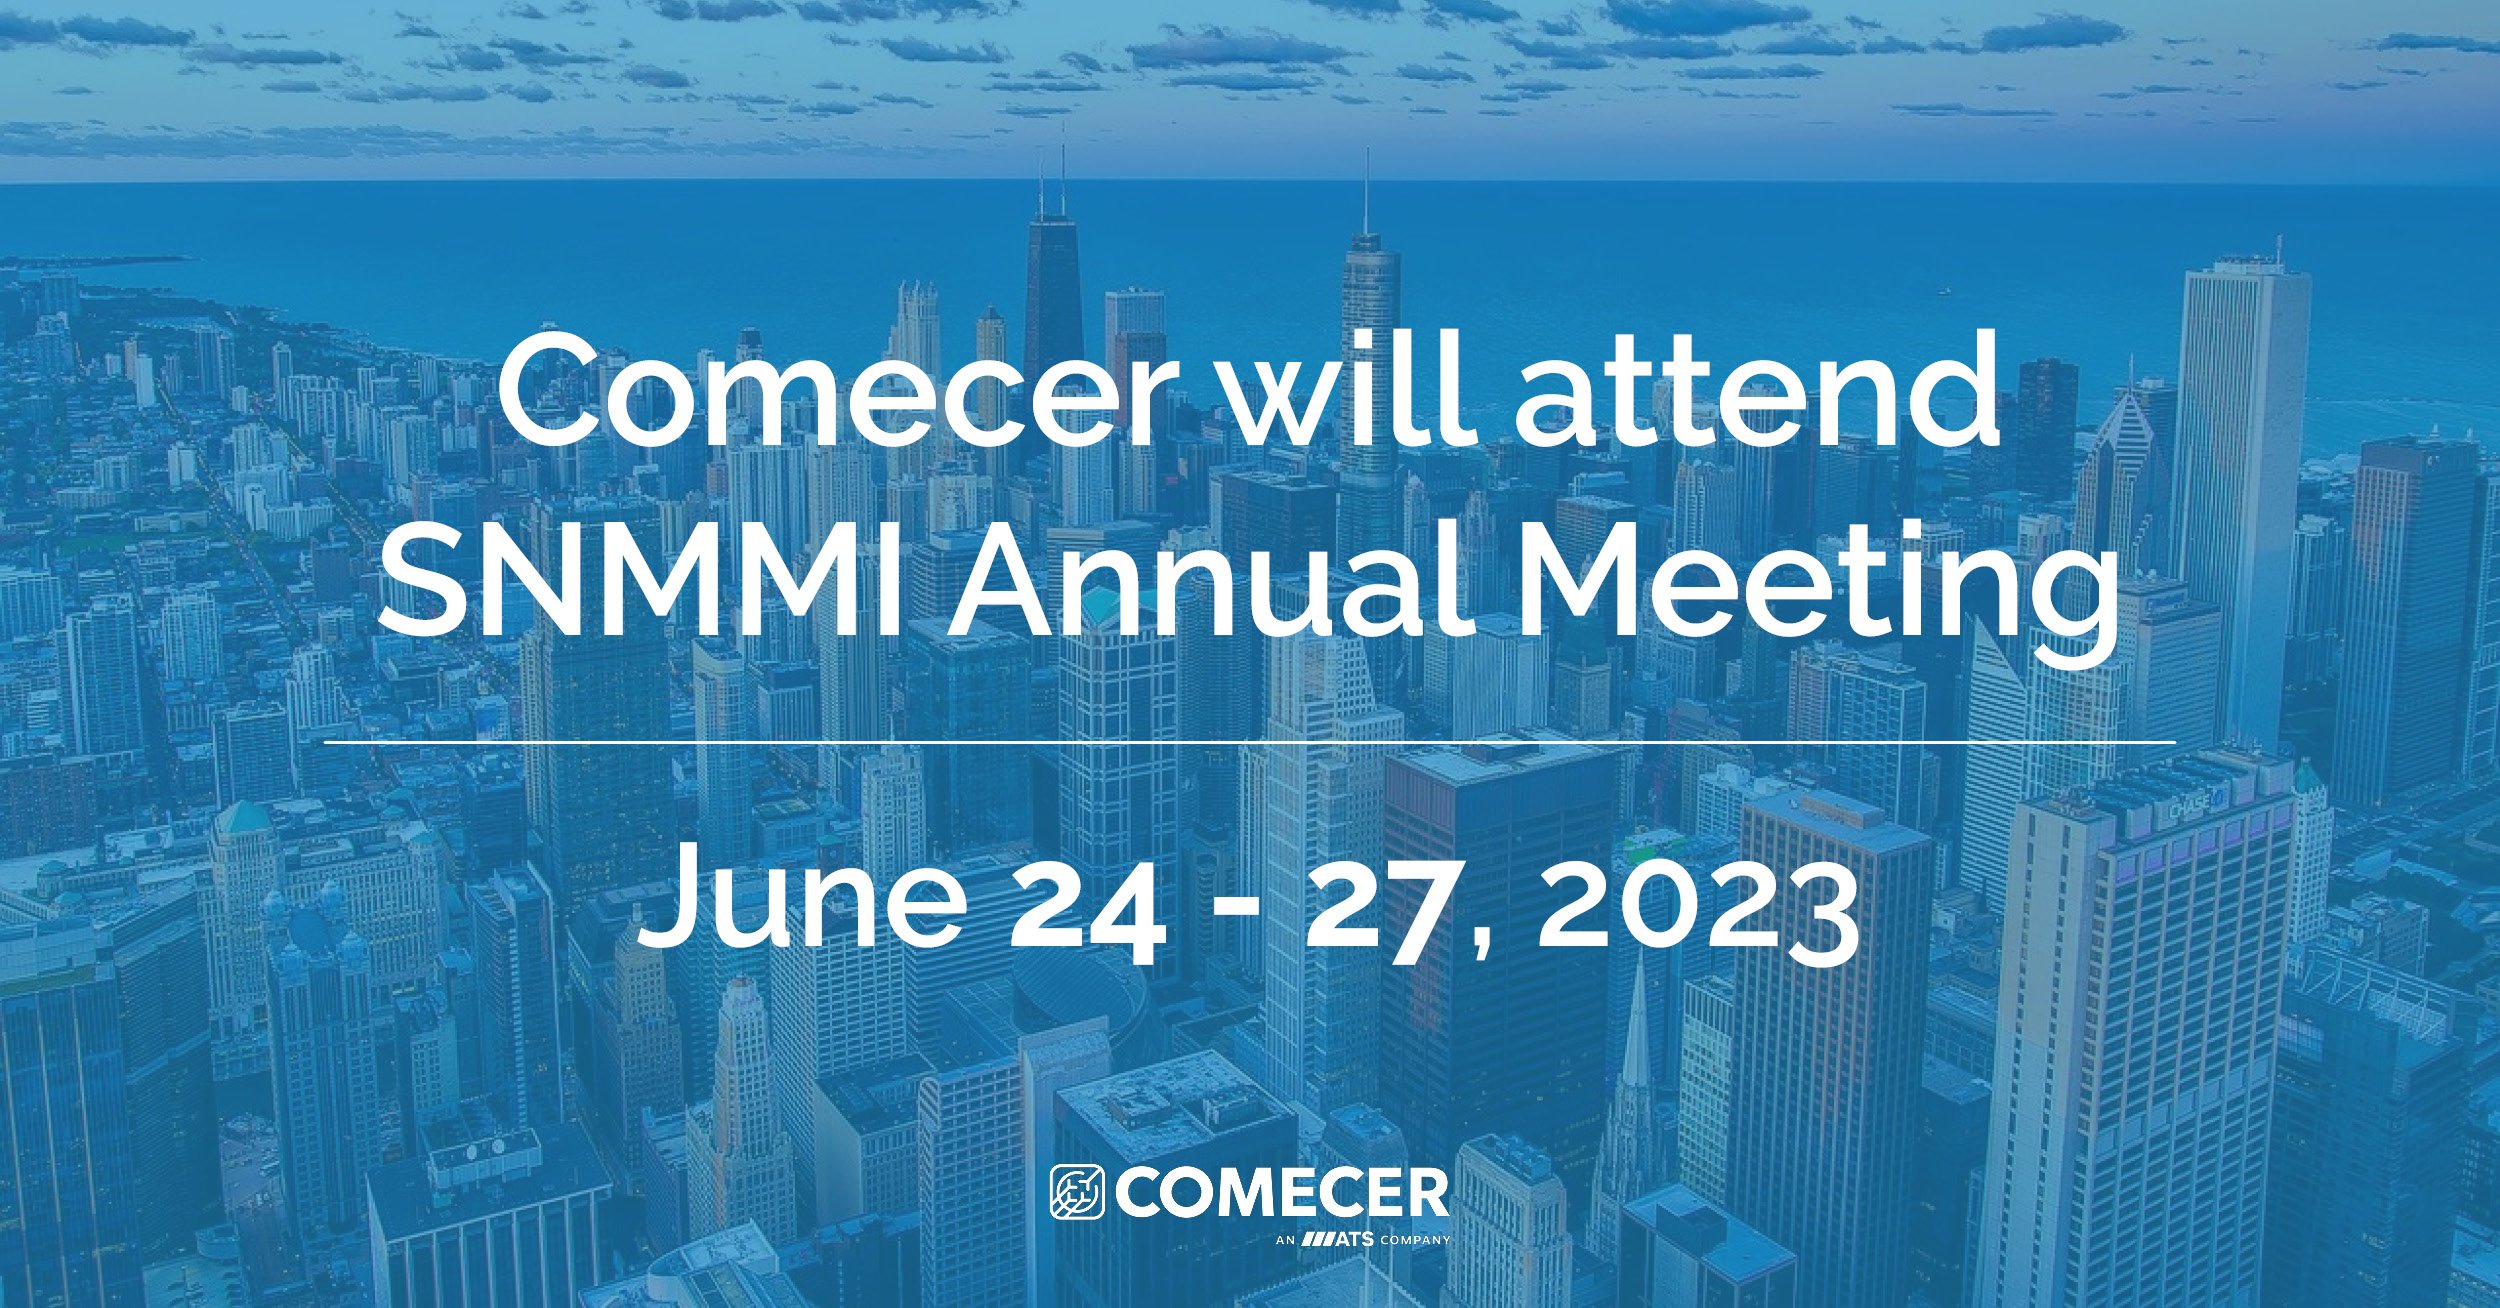 Comecer will attend the SNMMI Annual Meeting 2023